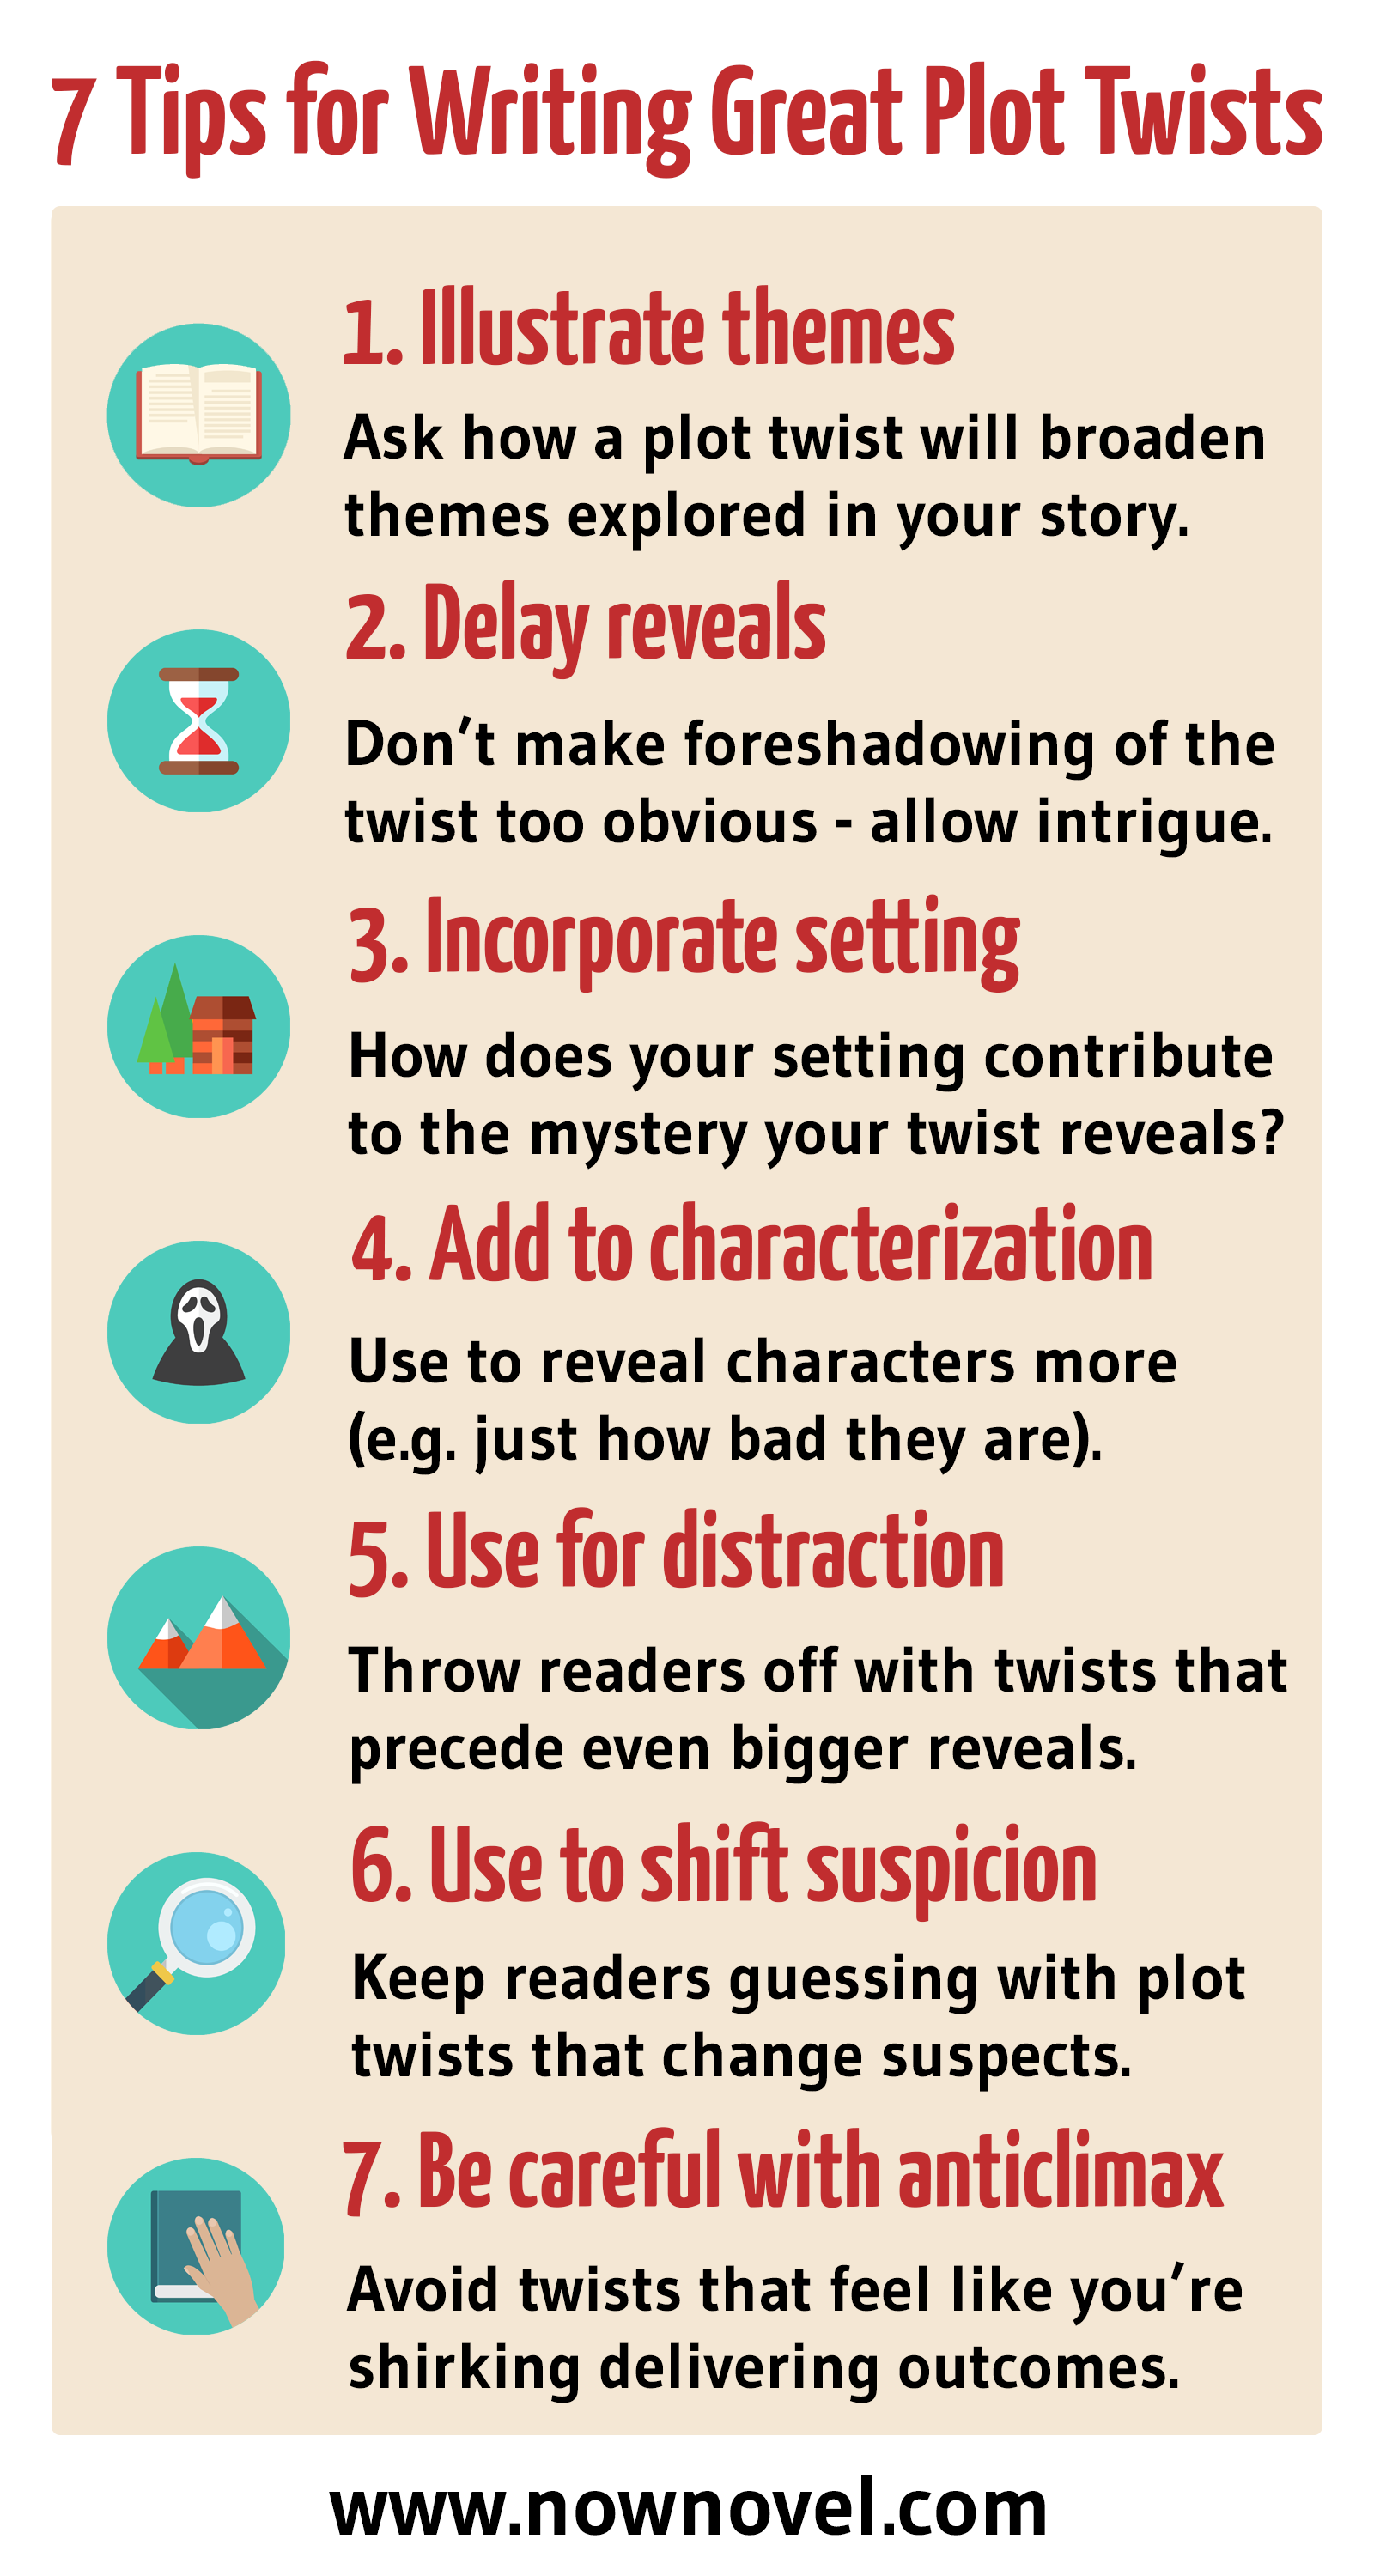 plot twist ideas: 7 examples and tips for twists | now novel